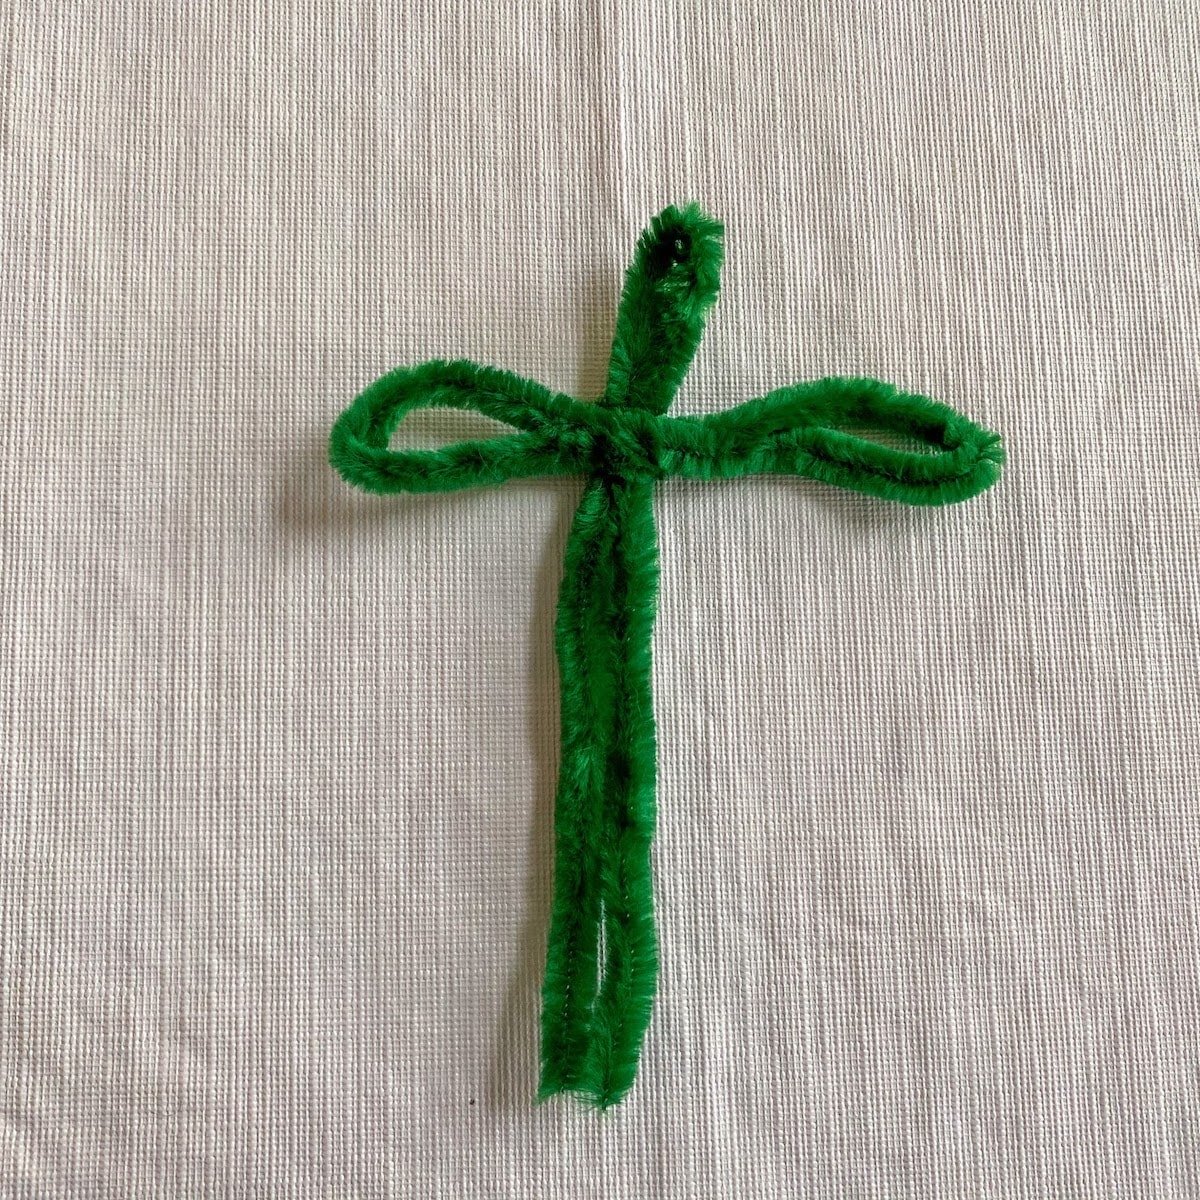 green pipe cleaner turned into stem